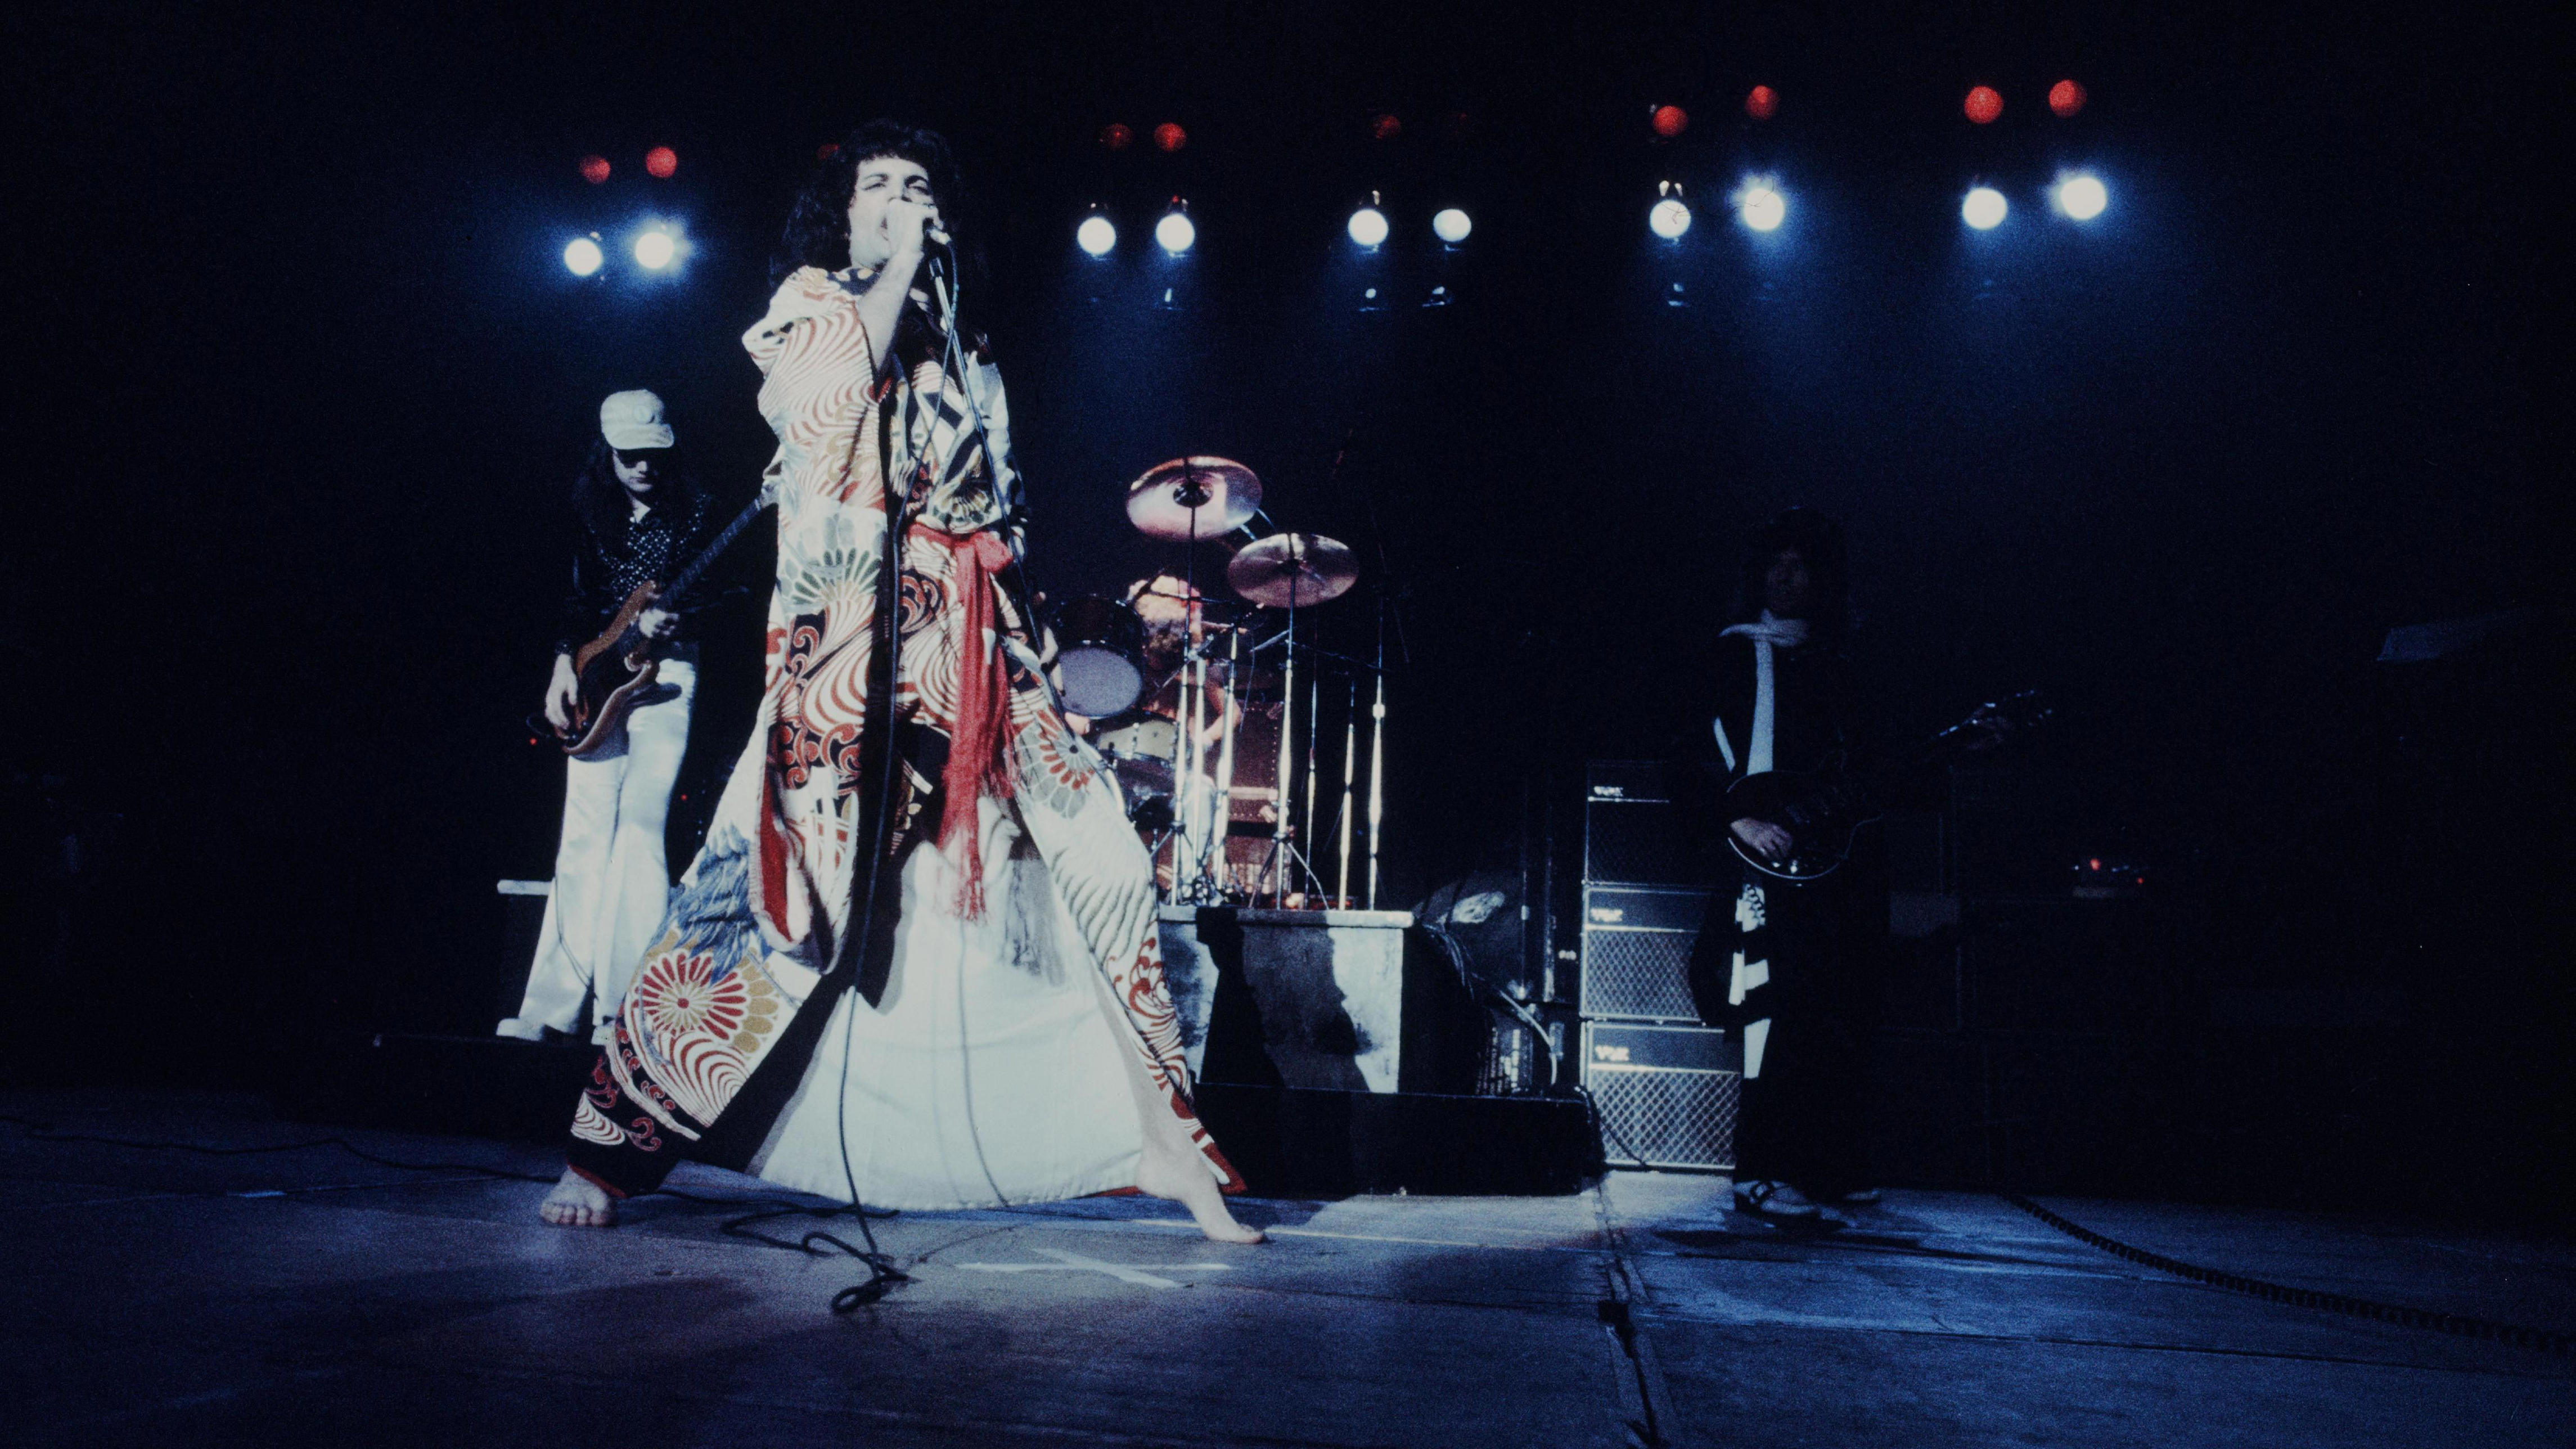 the japanese gown uniting freddie mercury, the jedi and bjork